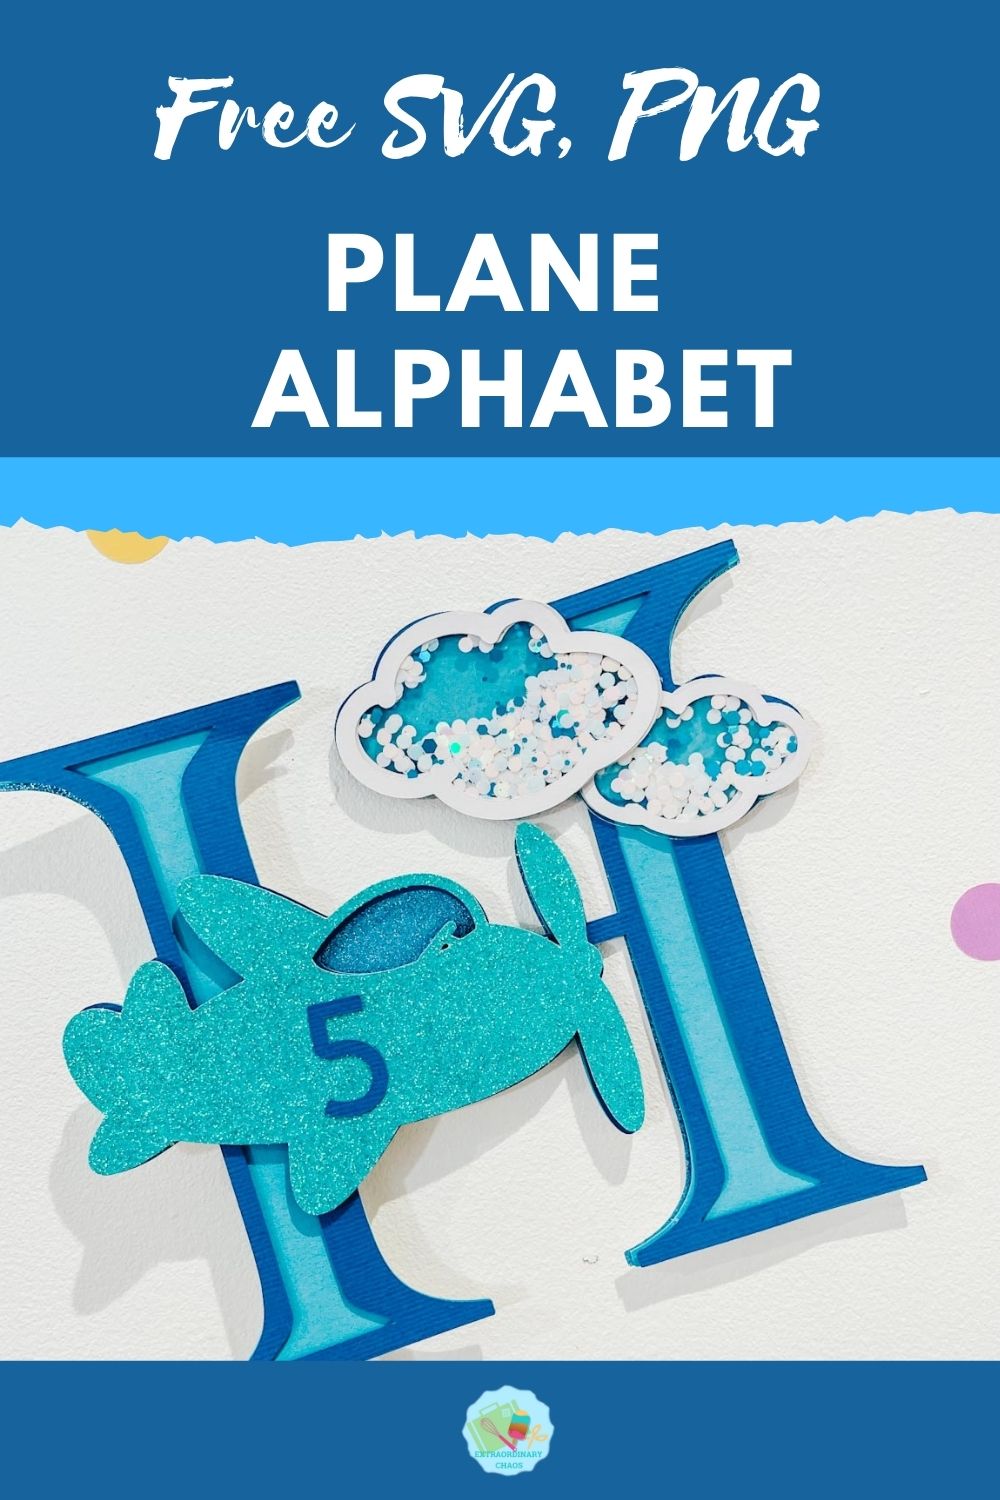 Free SVG, PNG Plane Alphabet for Cricut Silhouette and Glowforge